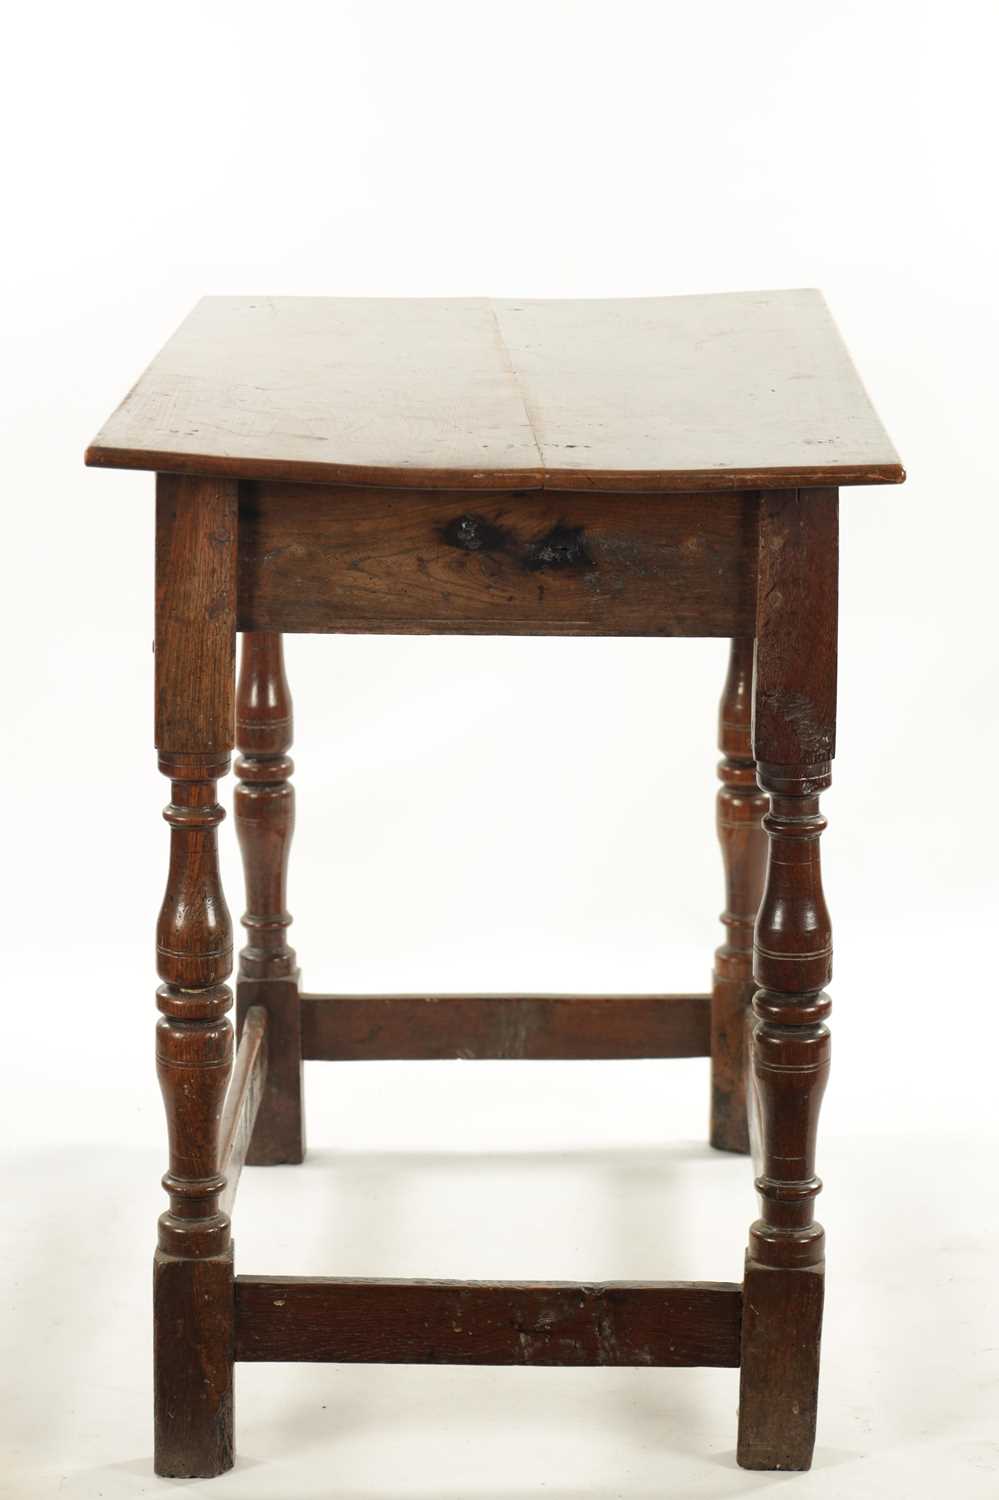 A LATE 17TH CENTURY ELM SIDE TABLE - Image 7 of 8